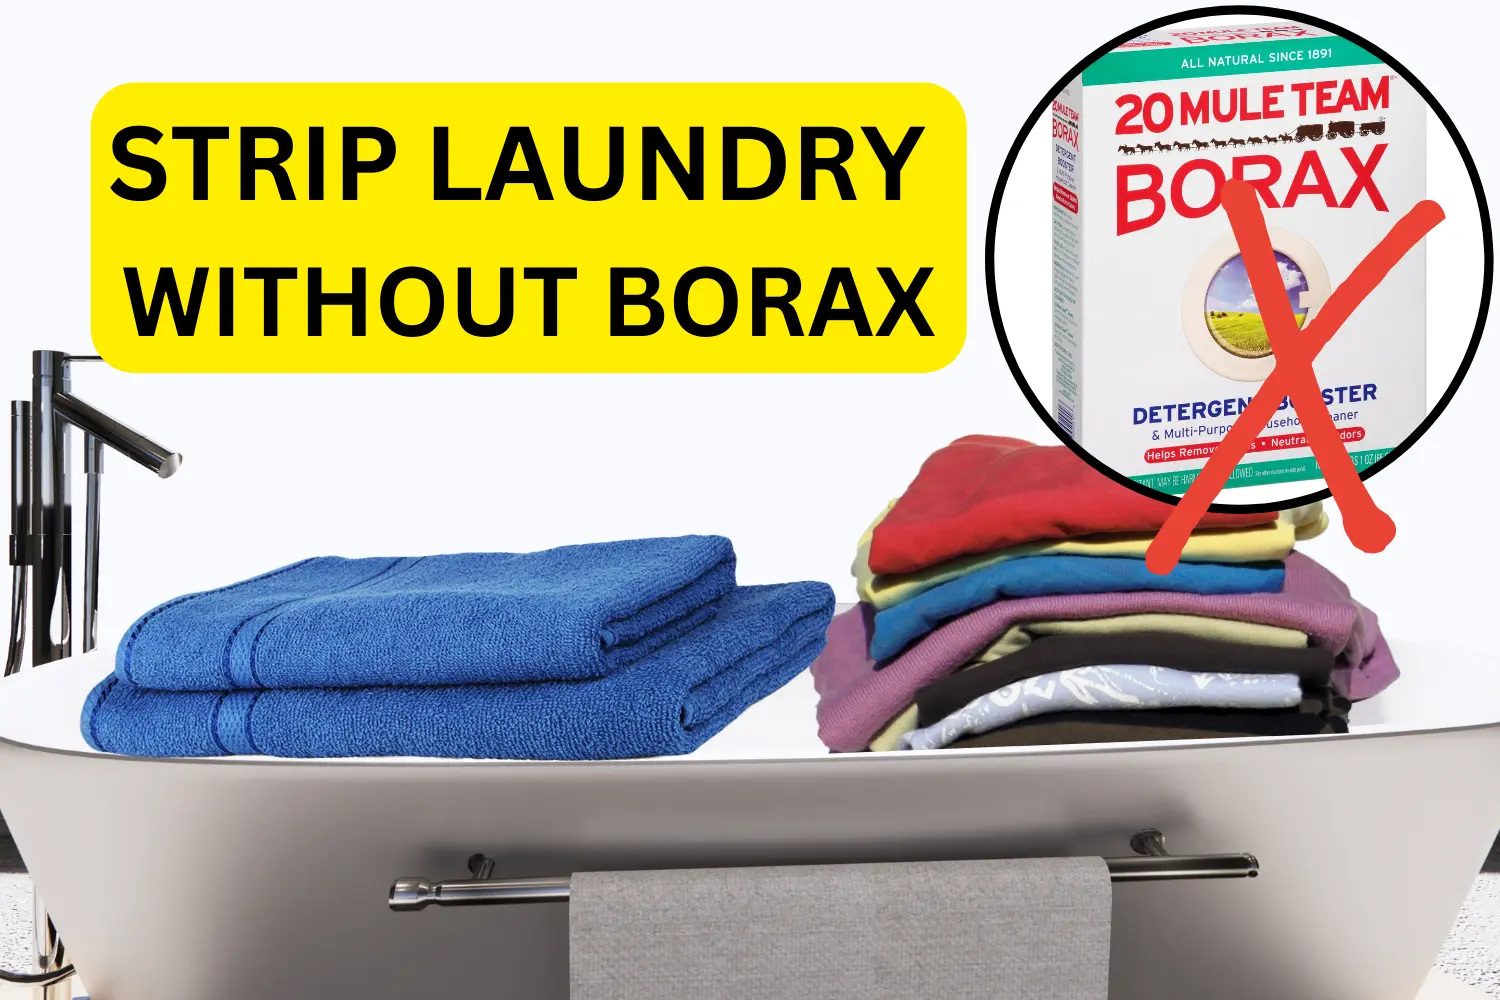 how to strip laundry without borax